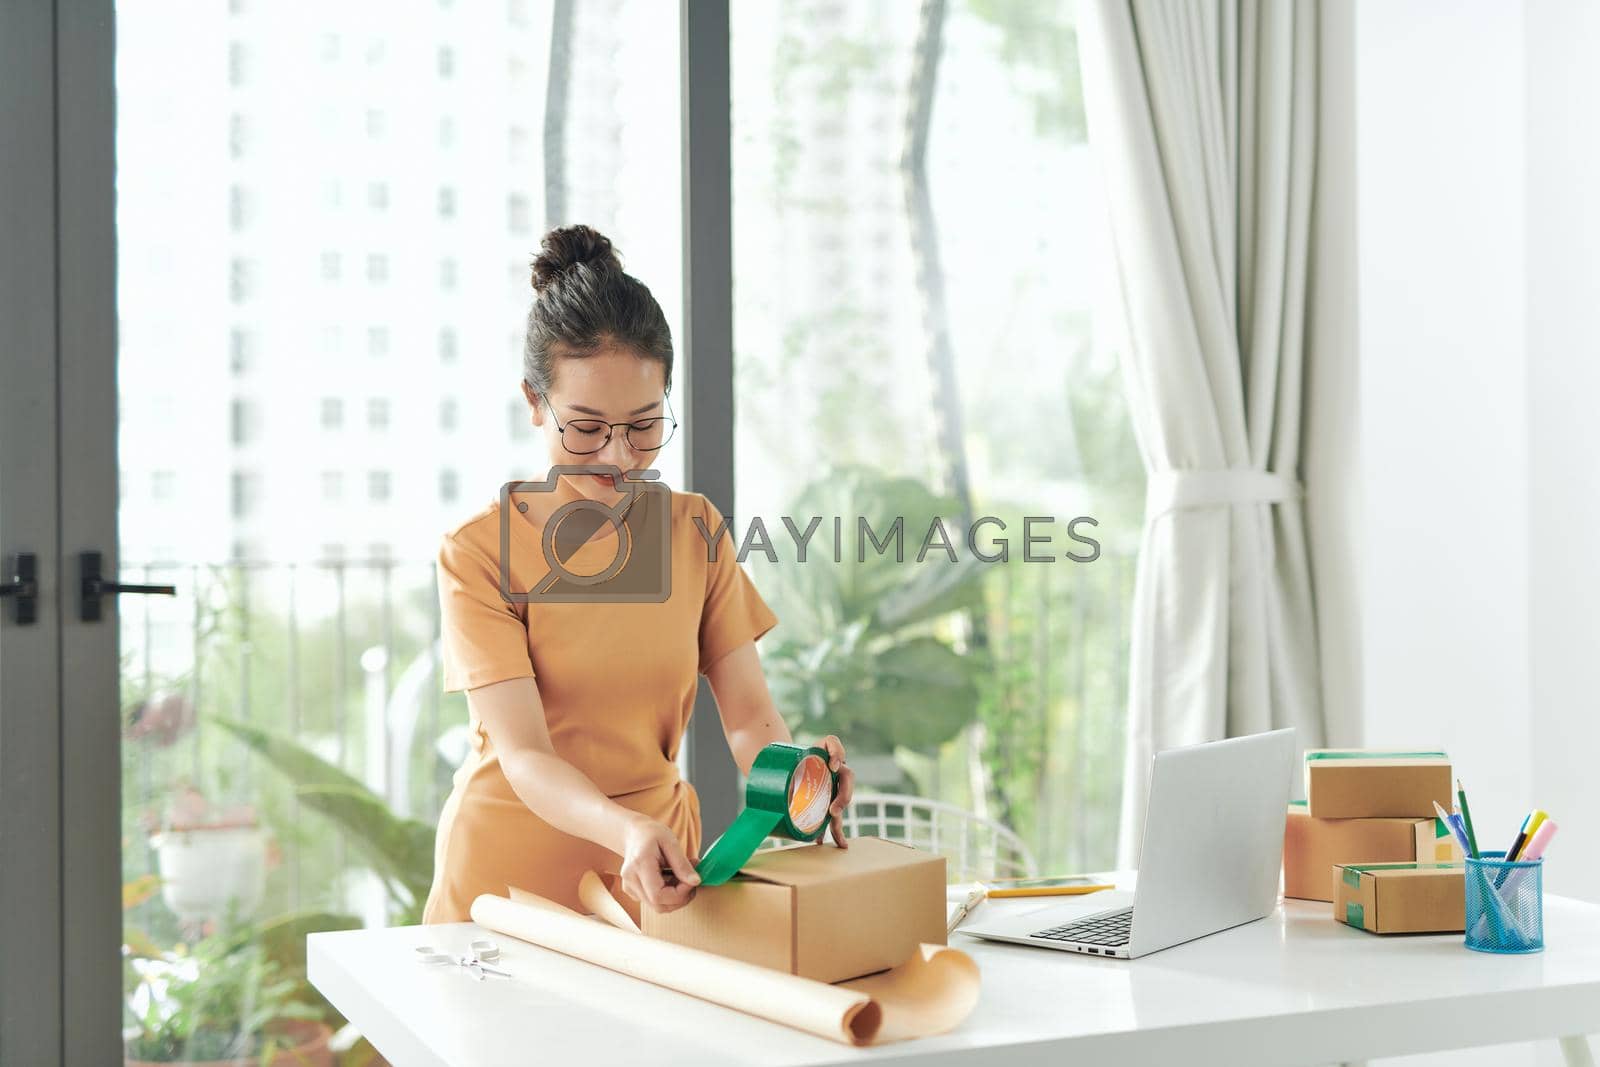 Royalty free image of Startup small business owner working at home, women sealing cardboard box with adhesive tape, by makidotvn